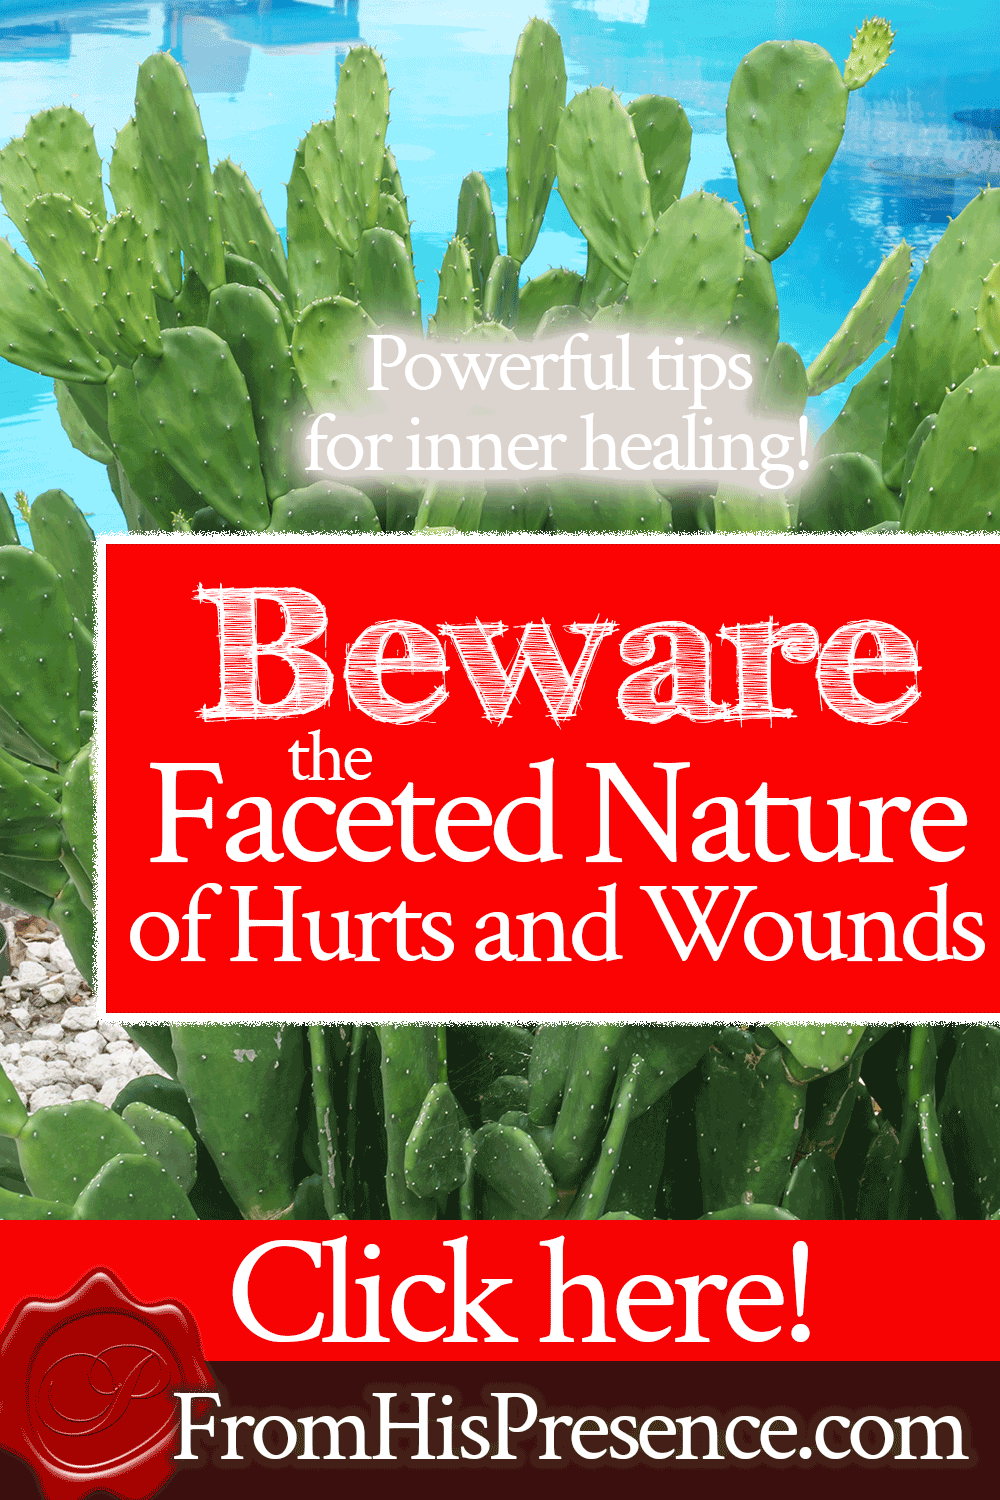 Beware the Faceted Nature of Hurts and Wounds | by Jamie Rohrbaugh | FromHisPresence.com